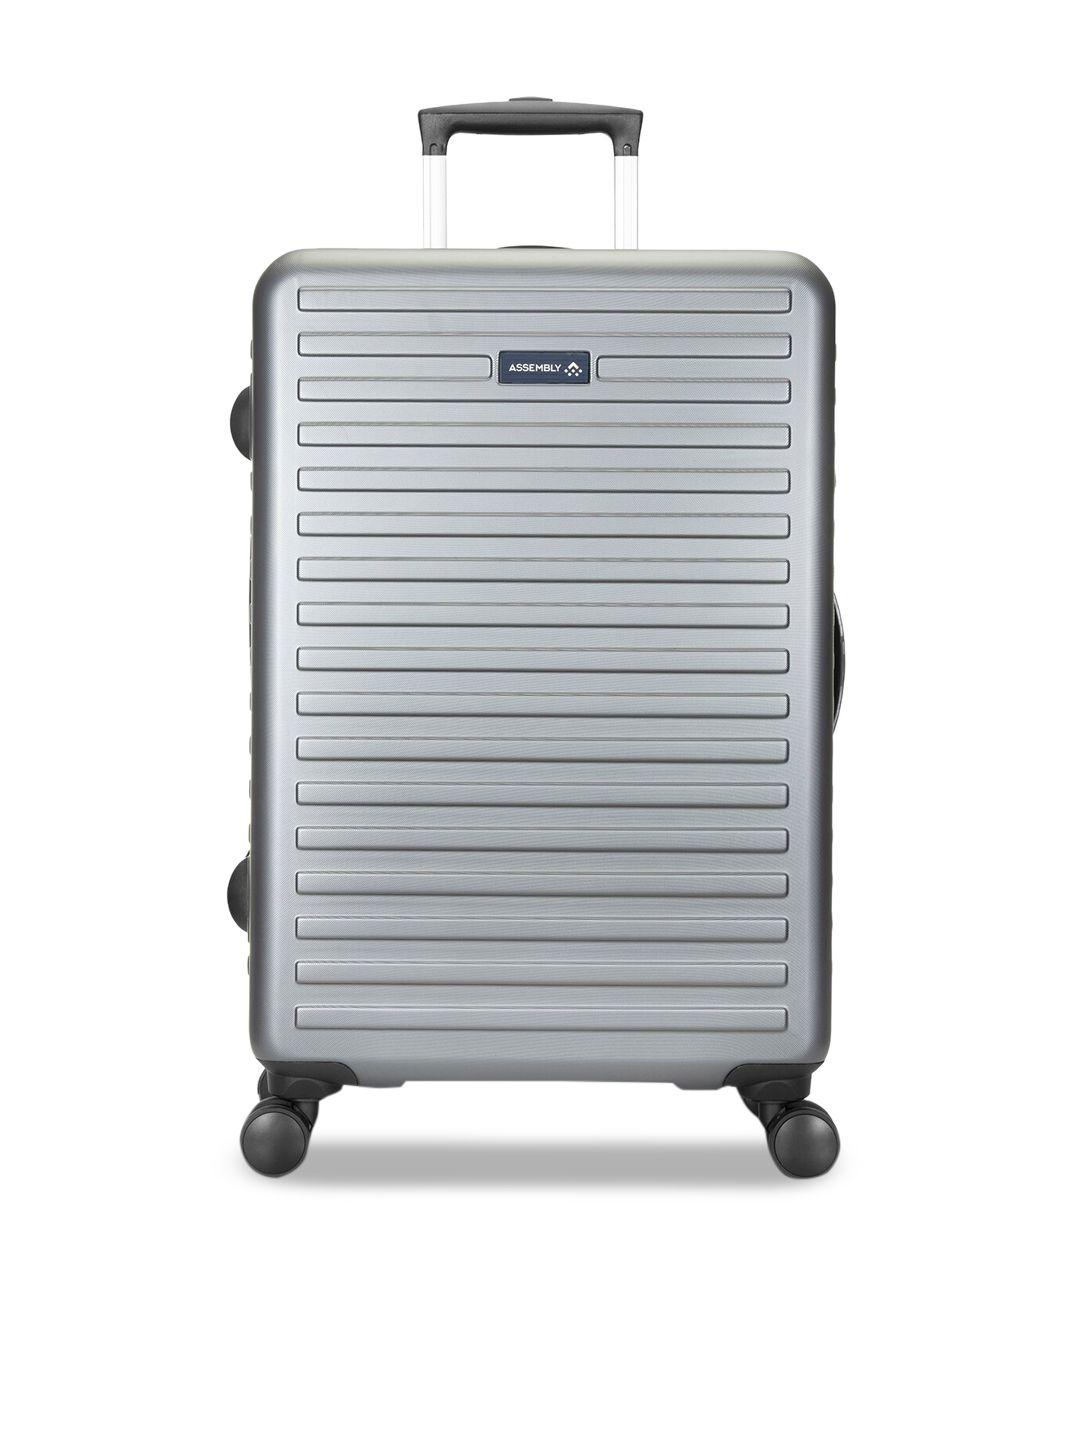 assembly grey textured large hard luggage trolley bag